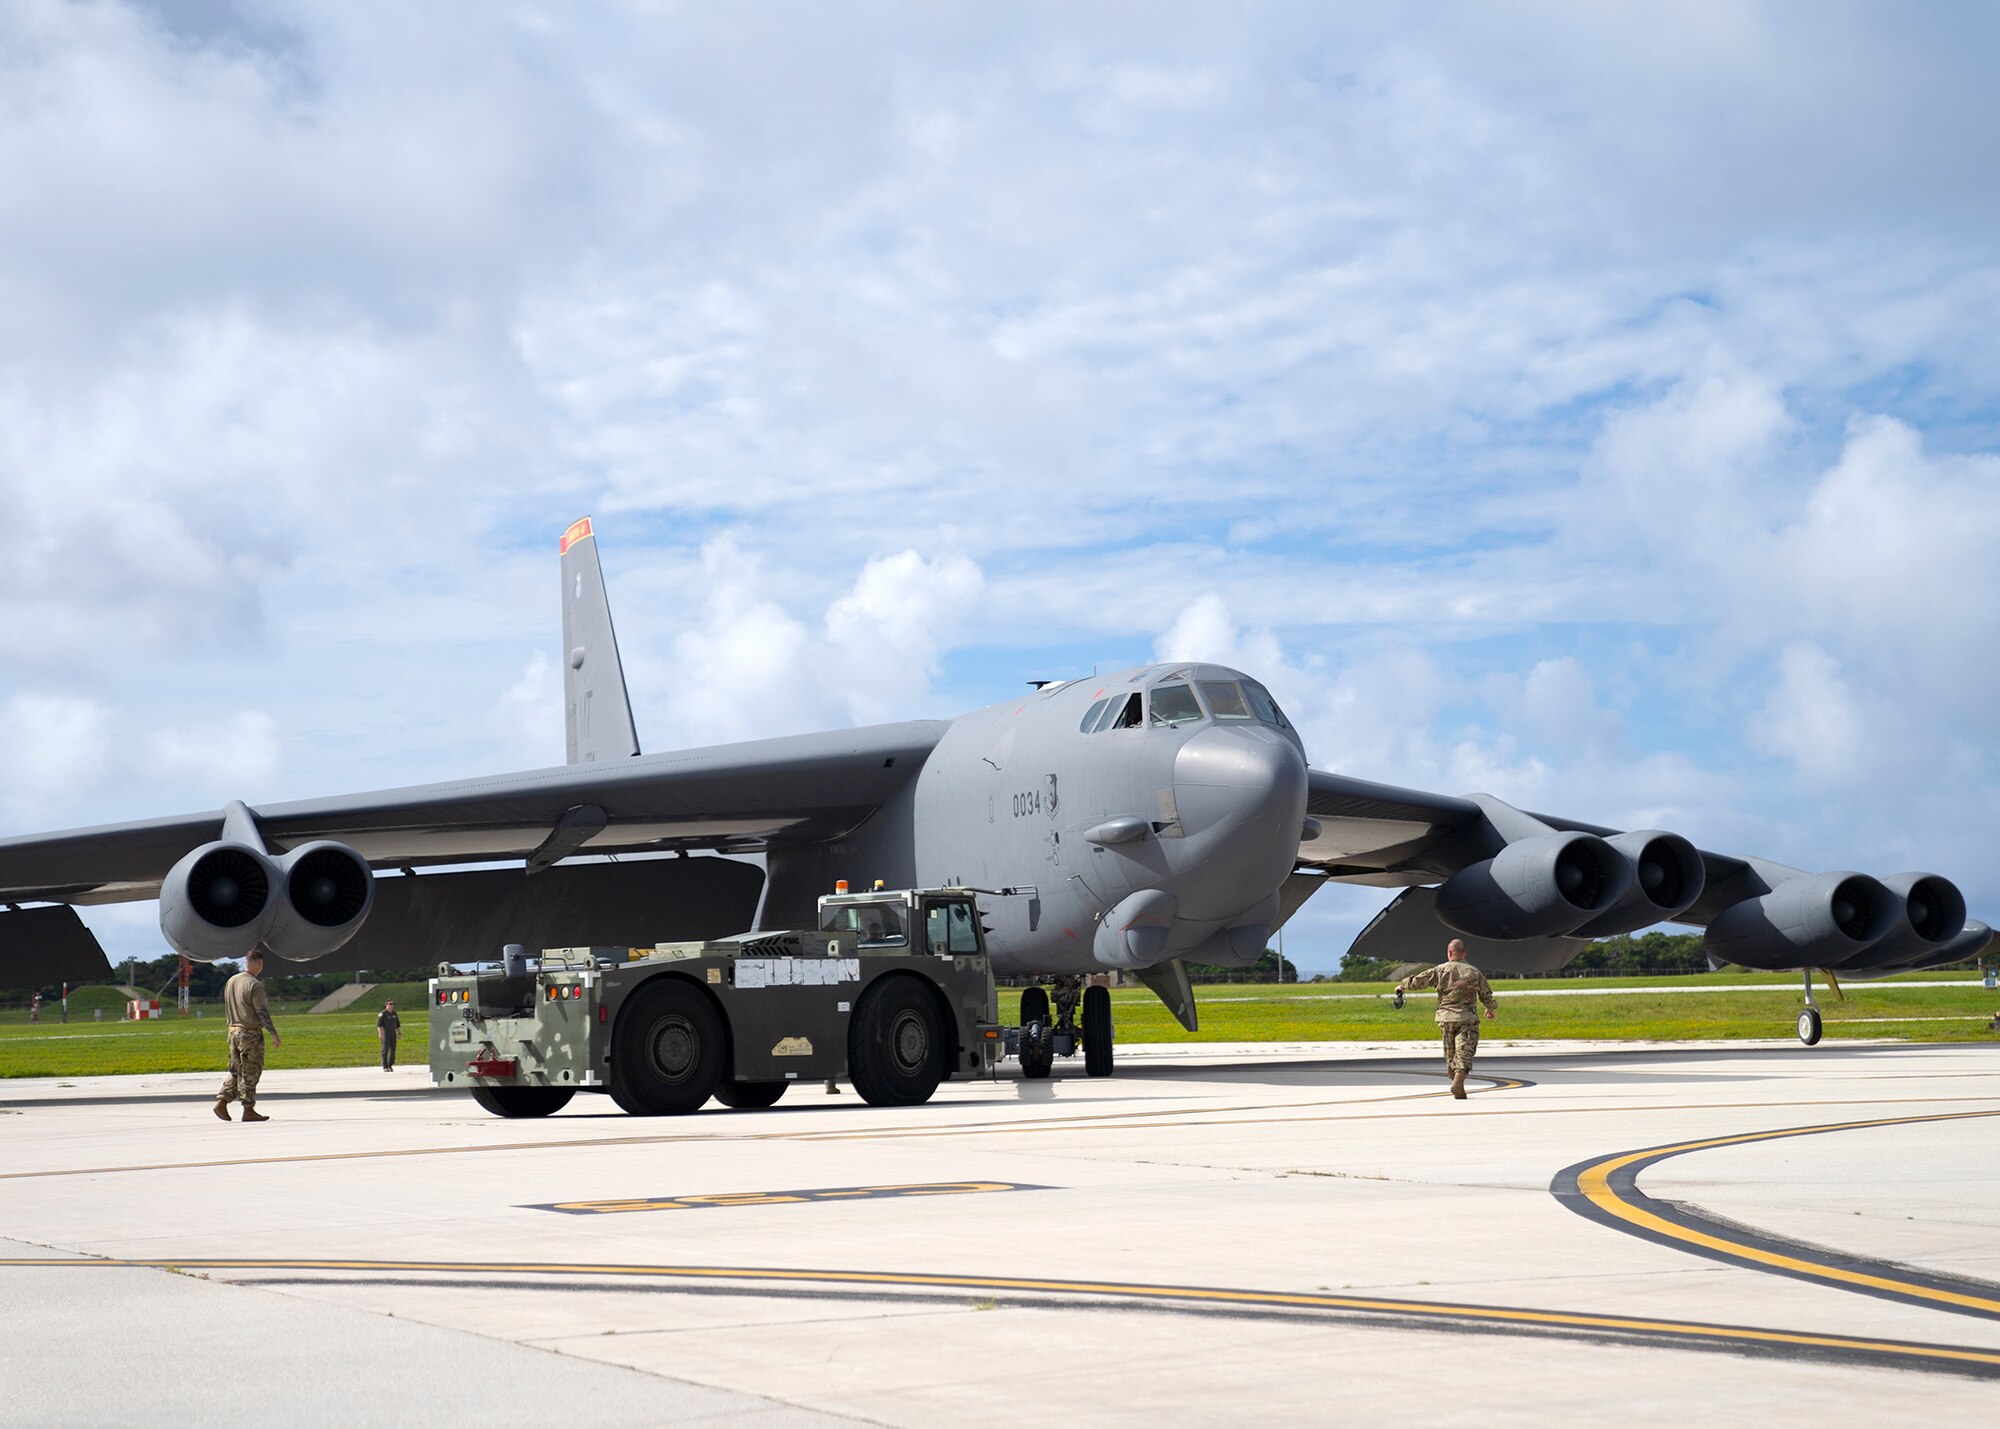 U.S. Air Force B-52H Stratofortress from the 5th Bomb Wing, Minot Air Force Base North Dakota, parks at Andersen Air Force Base, Guam, for a Bomber Task Force deployment, July 15, 2021. Bomber Task Force missions demonstrate the strategic credibility and tactical flexibility of U.S. forces in today’s security environment across the globe. (U.S. Air Force photo by Staff Sgt. Kevin Iinuma)